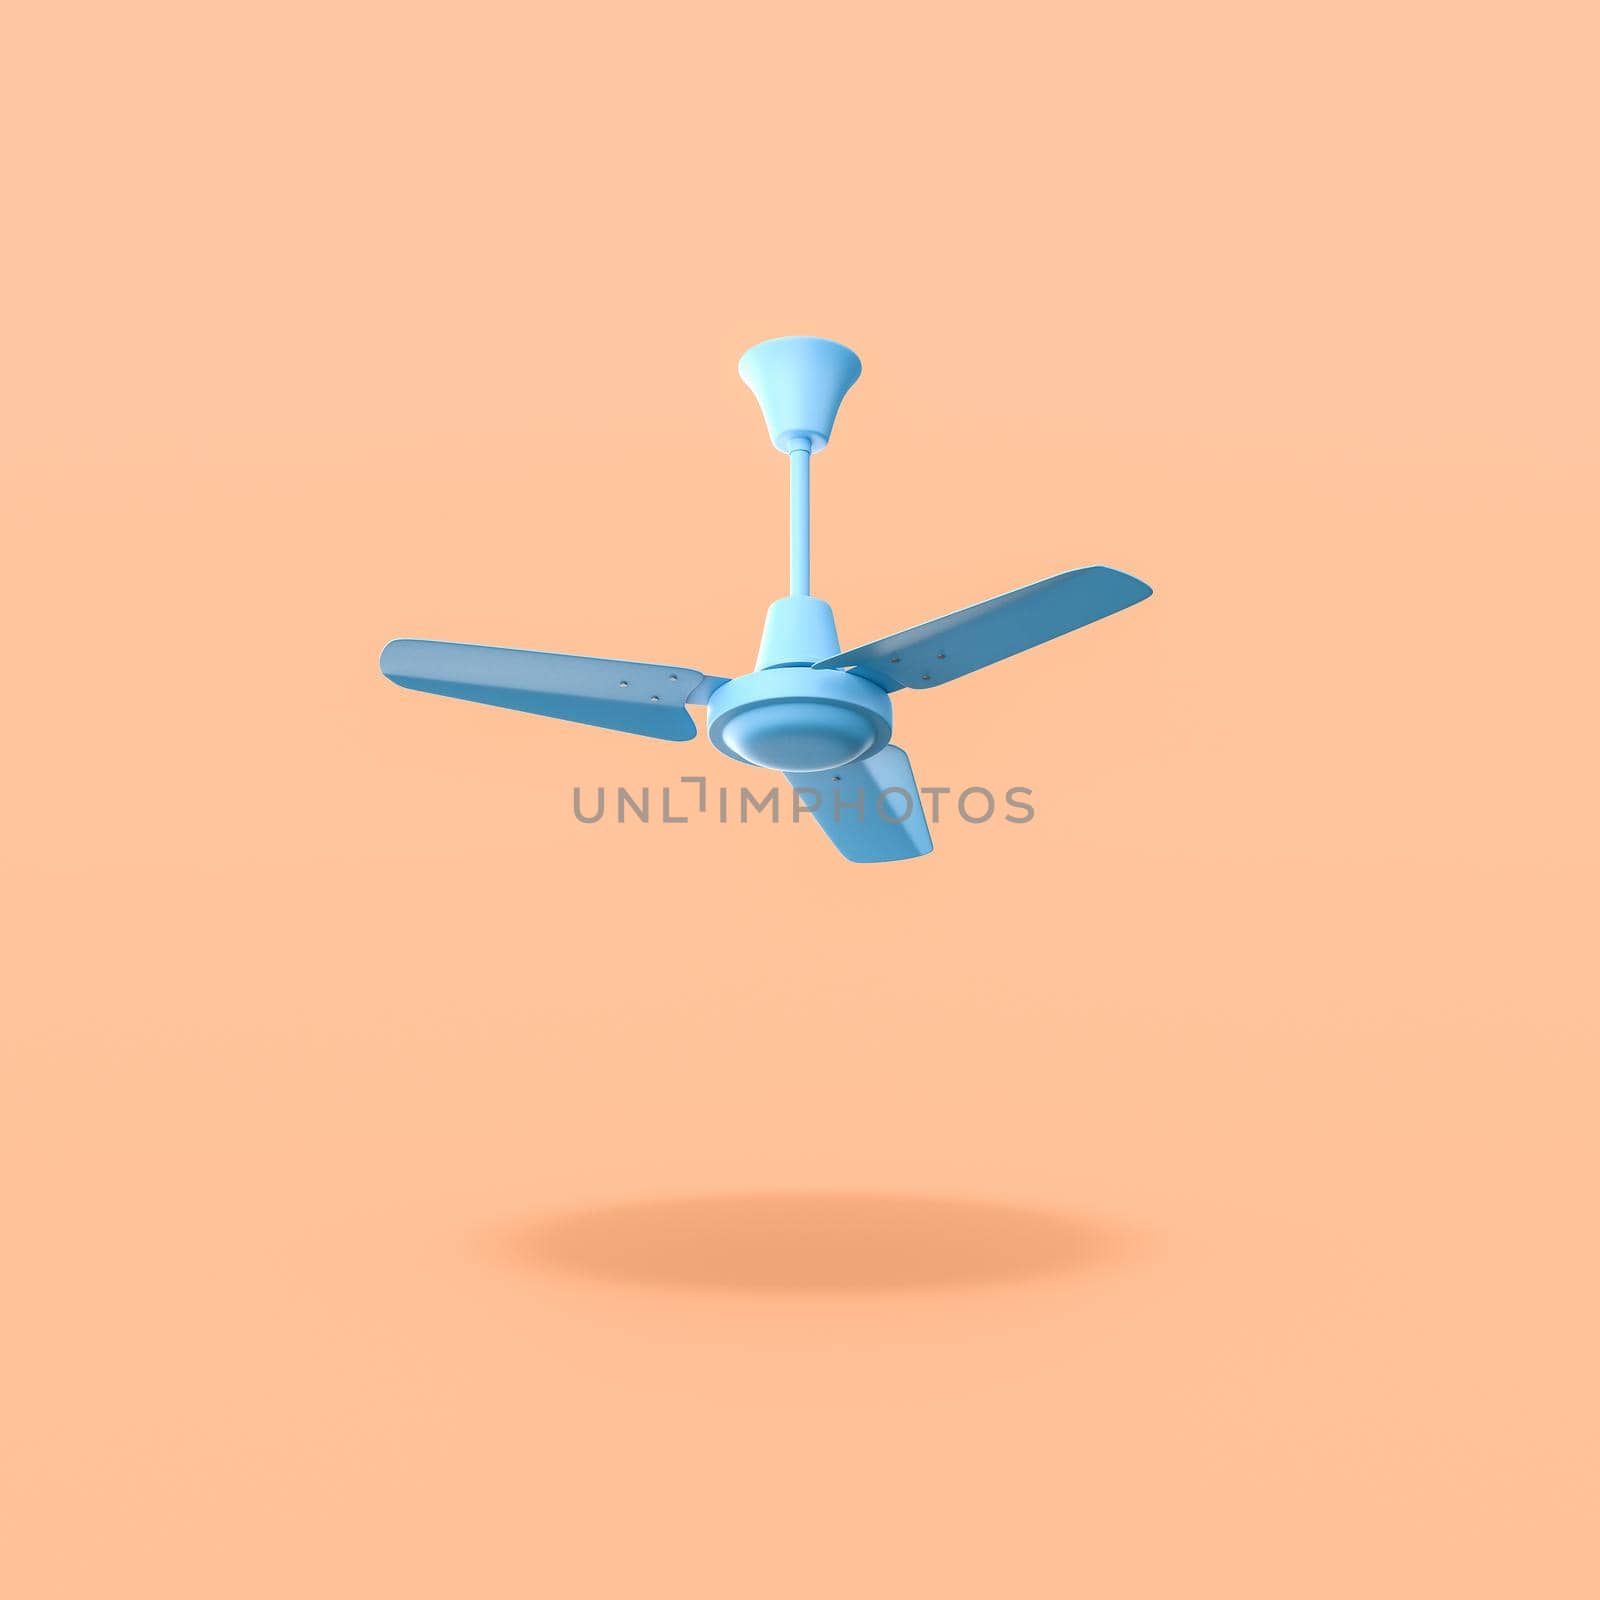 Blue Ceiling Fan Isolated on Flat Orange Background with Shadow 3D Illustration